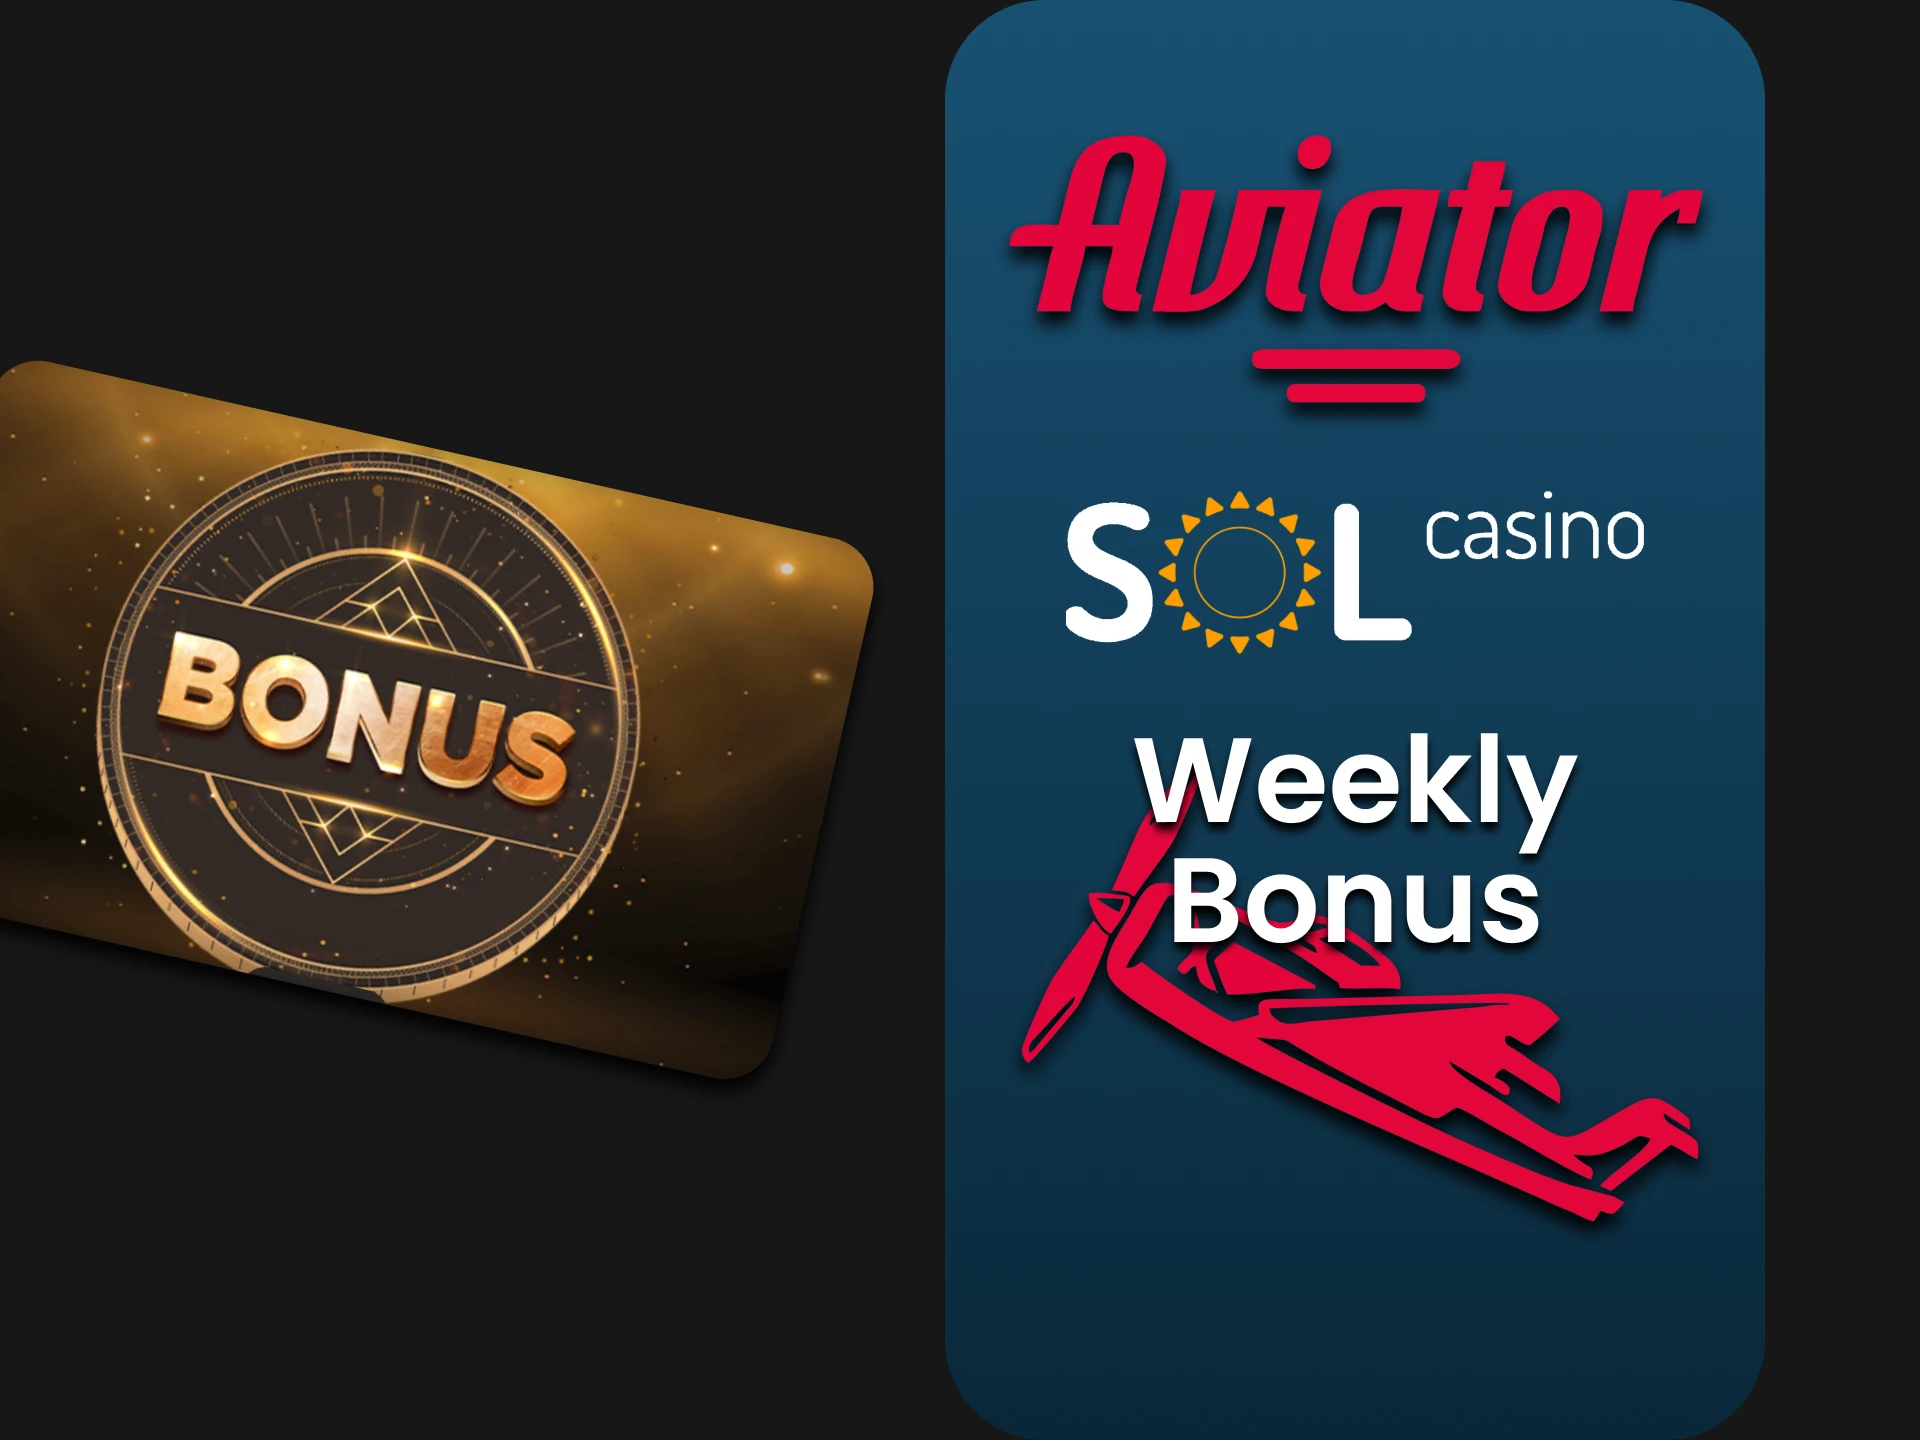 Sol Casino gives a weekly bonus for the Aviator.